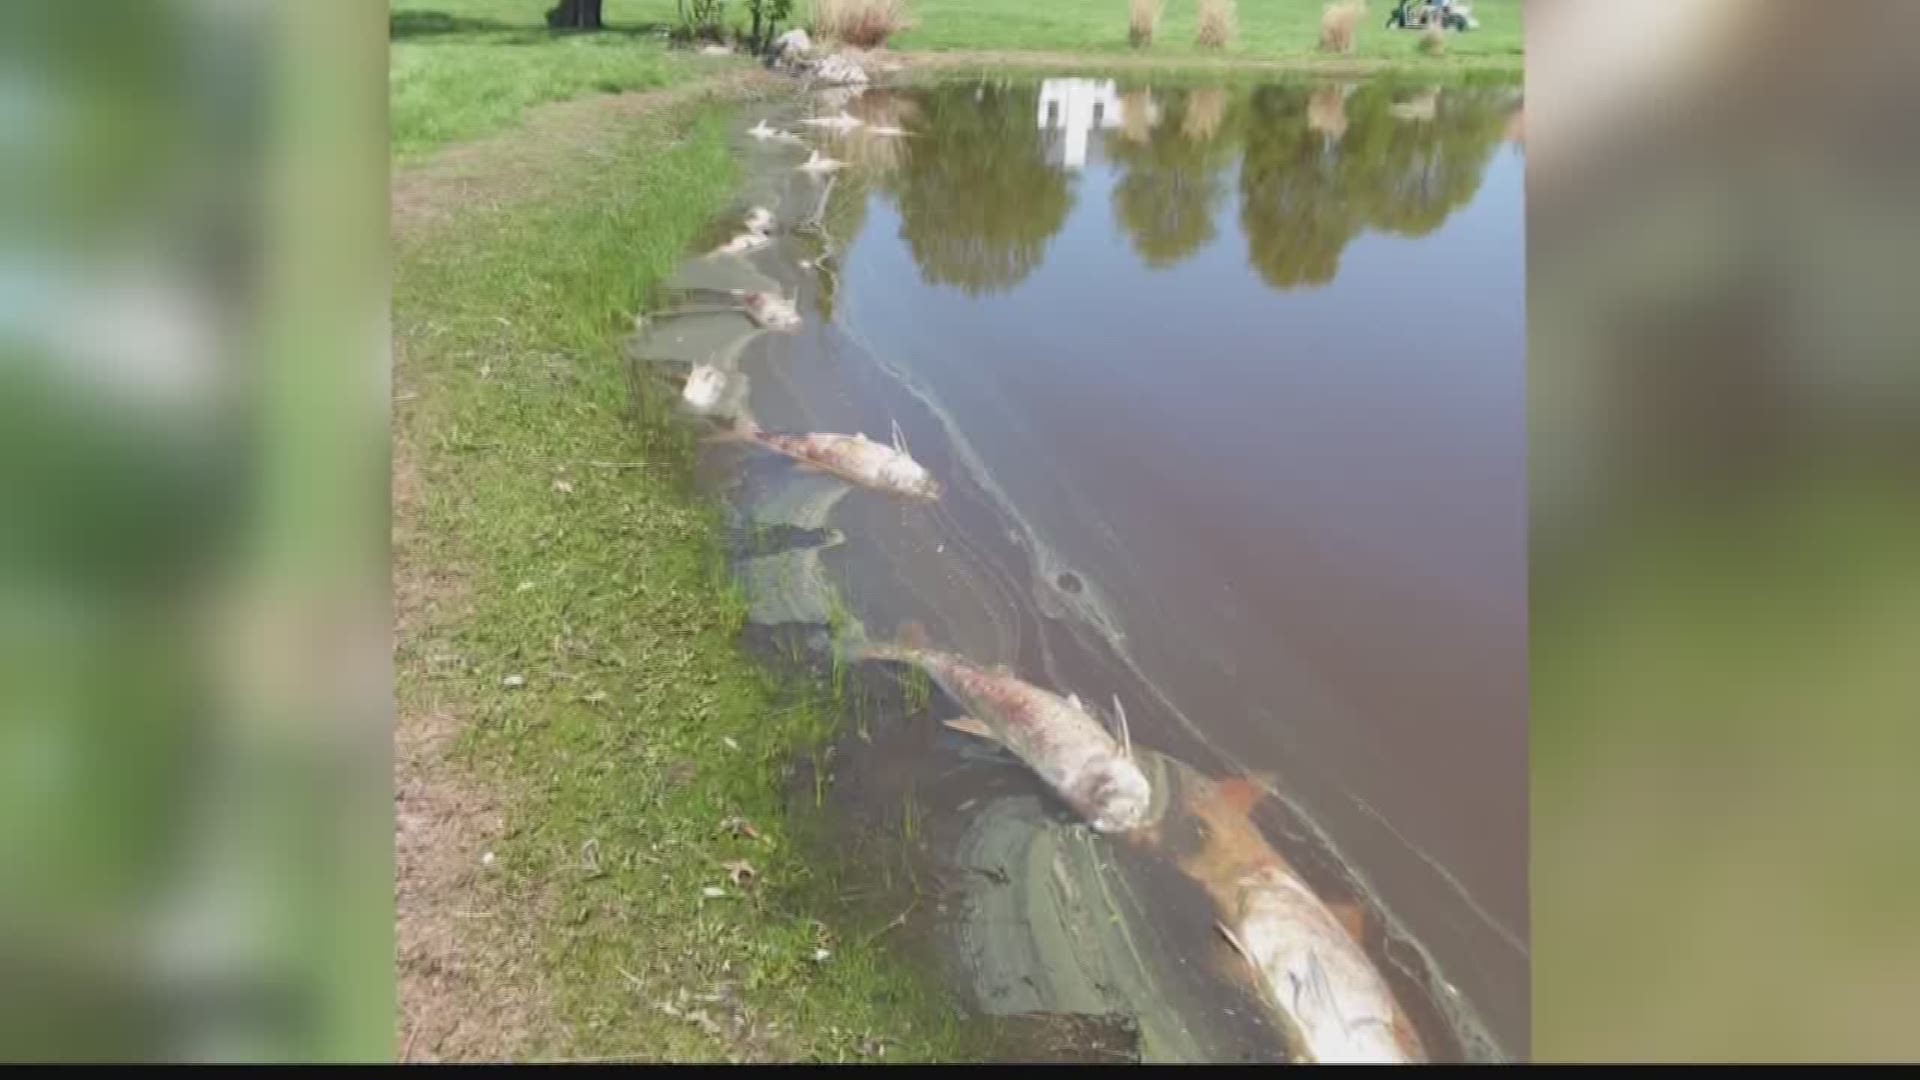 Thousands of dead fish washed up on the banks of a neighborhood lake.